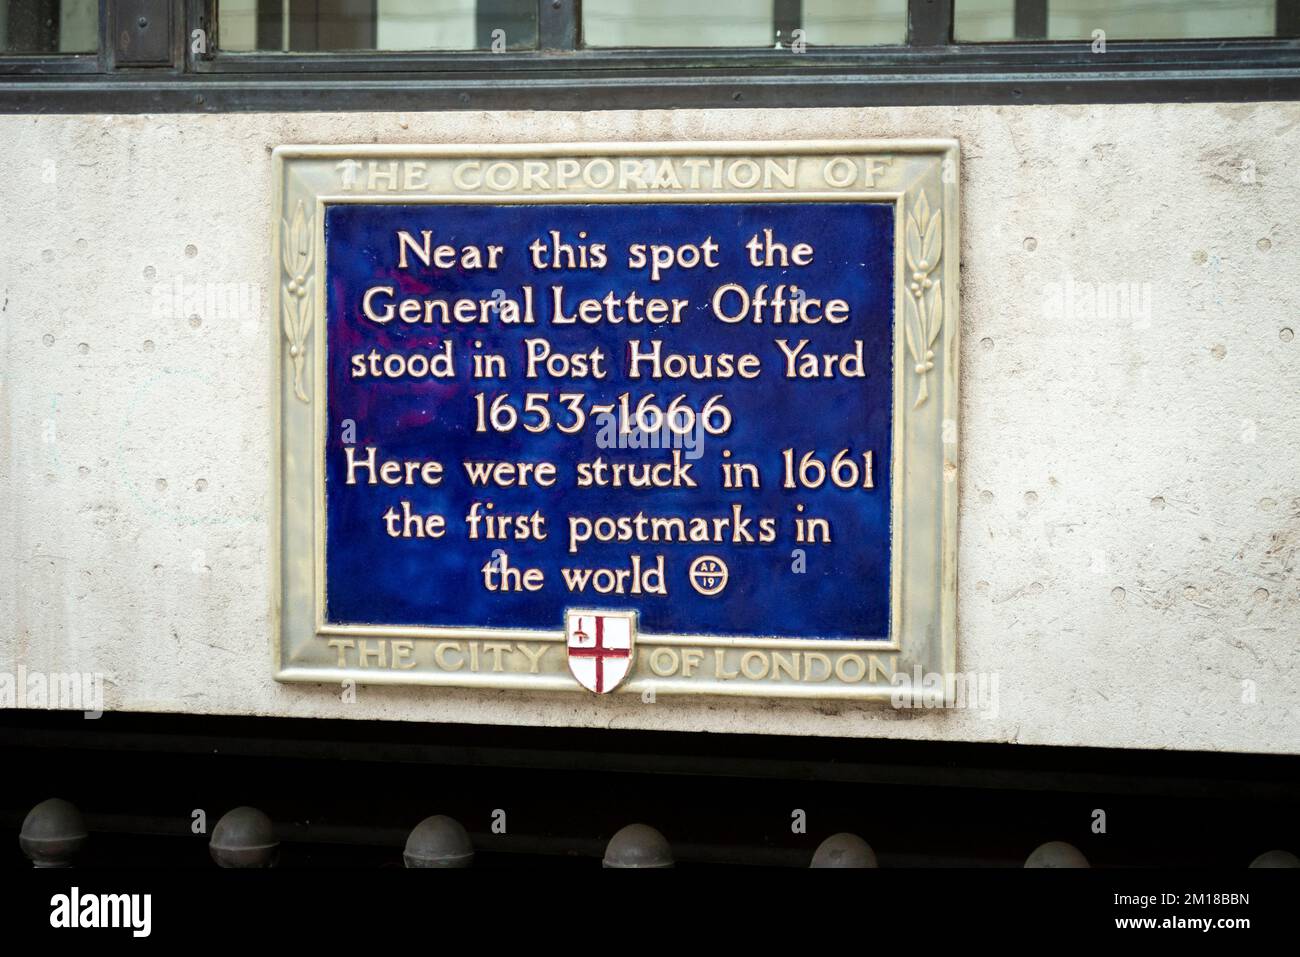 Site of first postmark in the world plaque. Near this spot the General Letter Office stood in Post House Yard 1653-1666, in the City of London, UK. Stock Photo